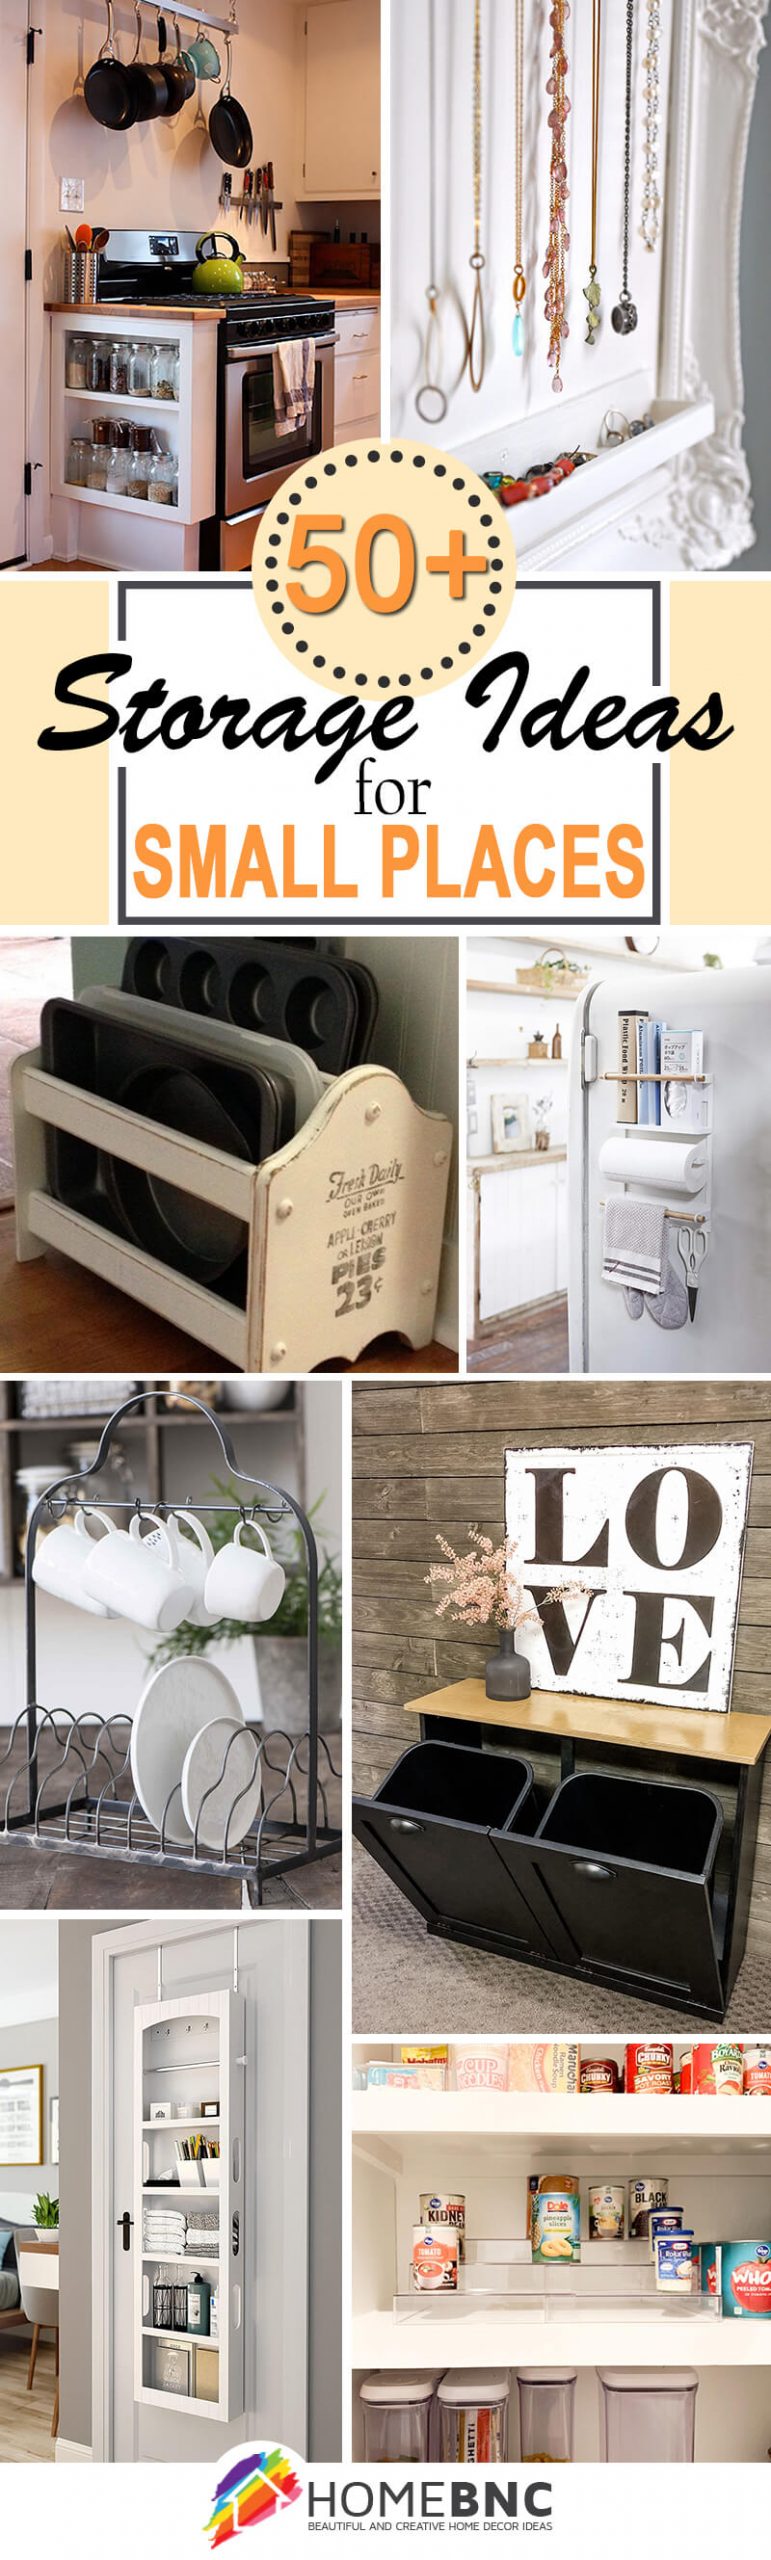 18+ Best Storage Ideas and Projects for Small Spaces in 18